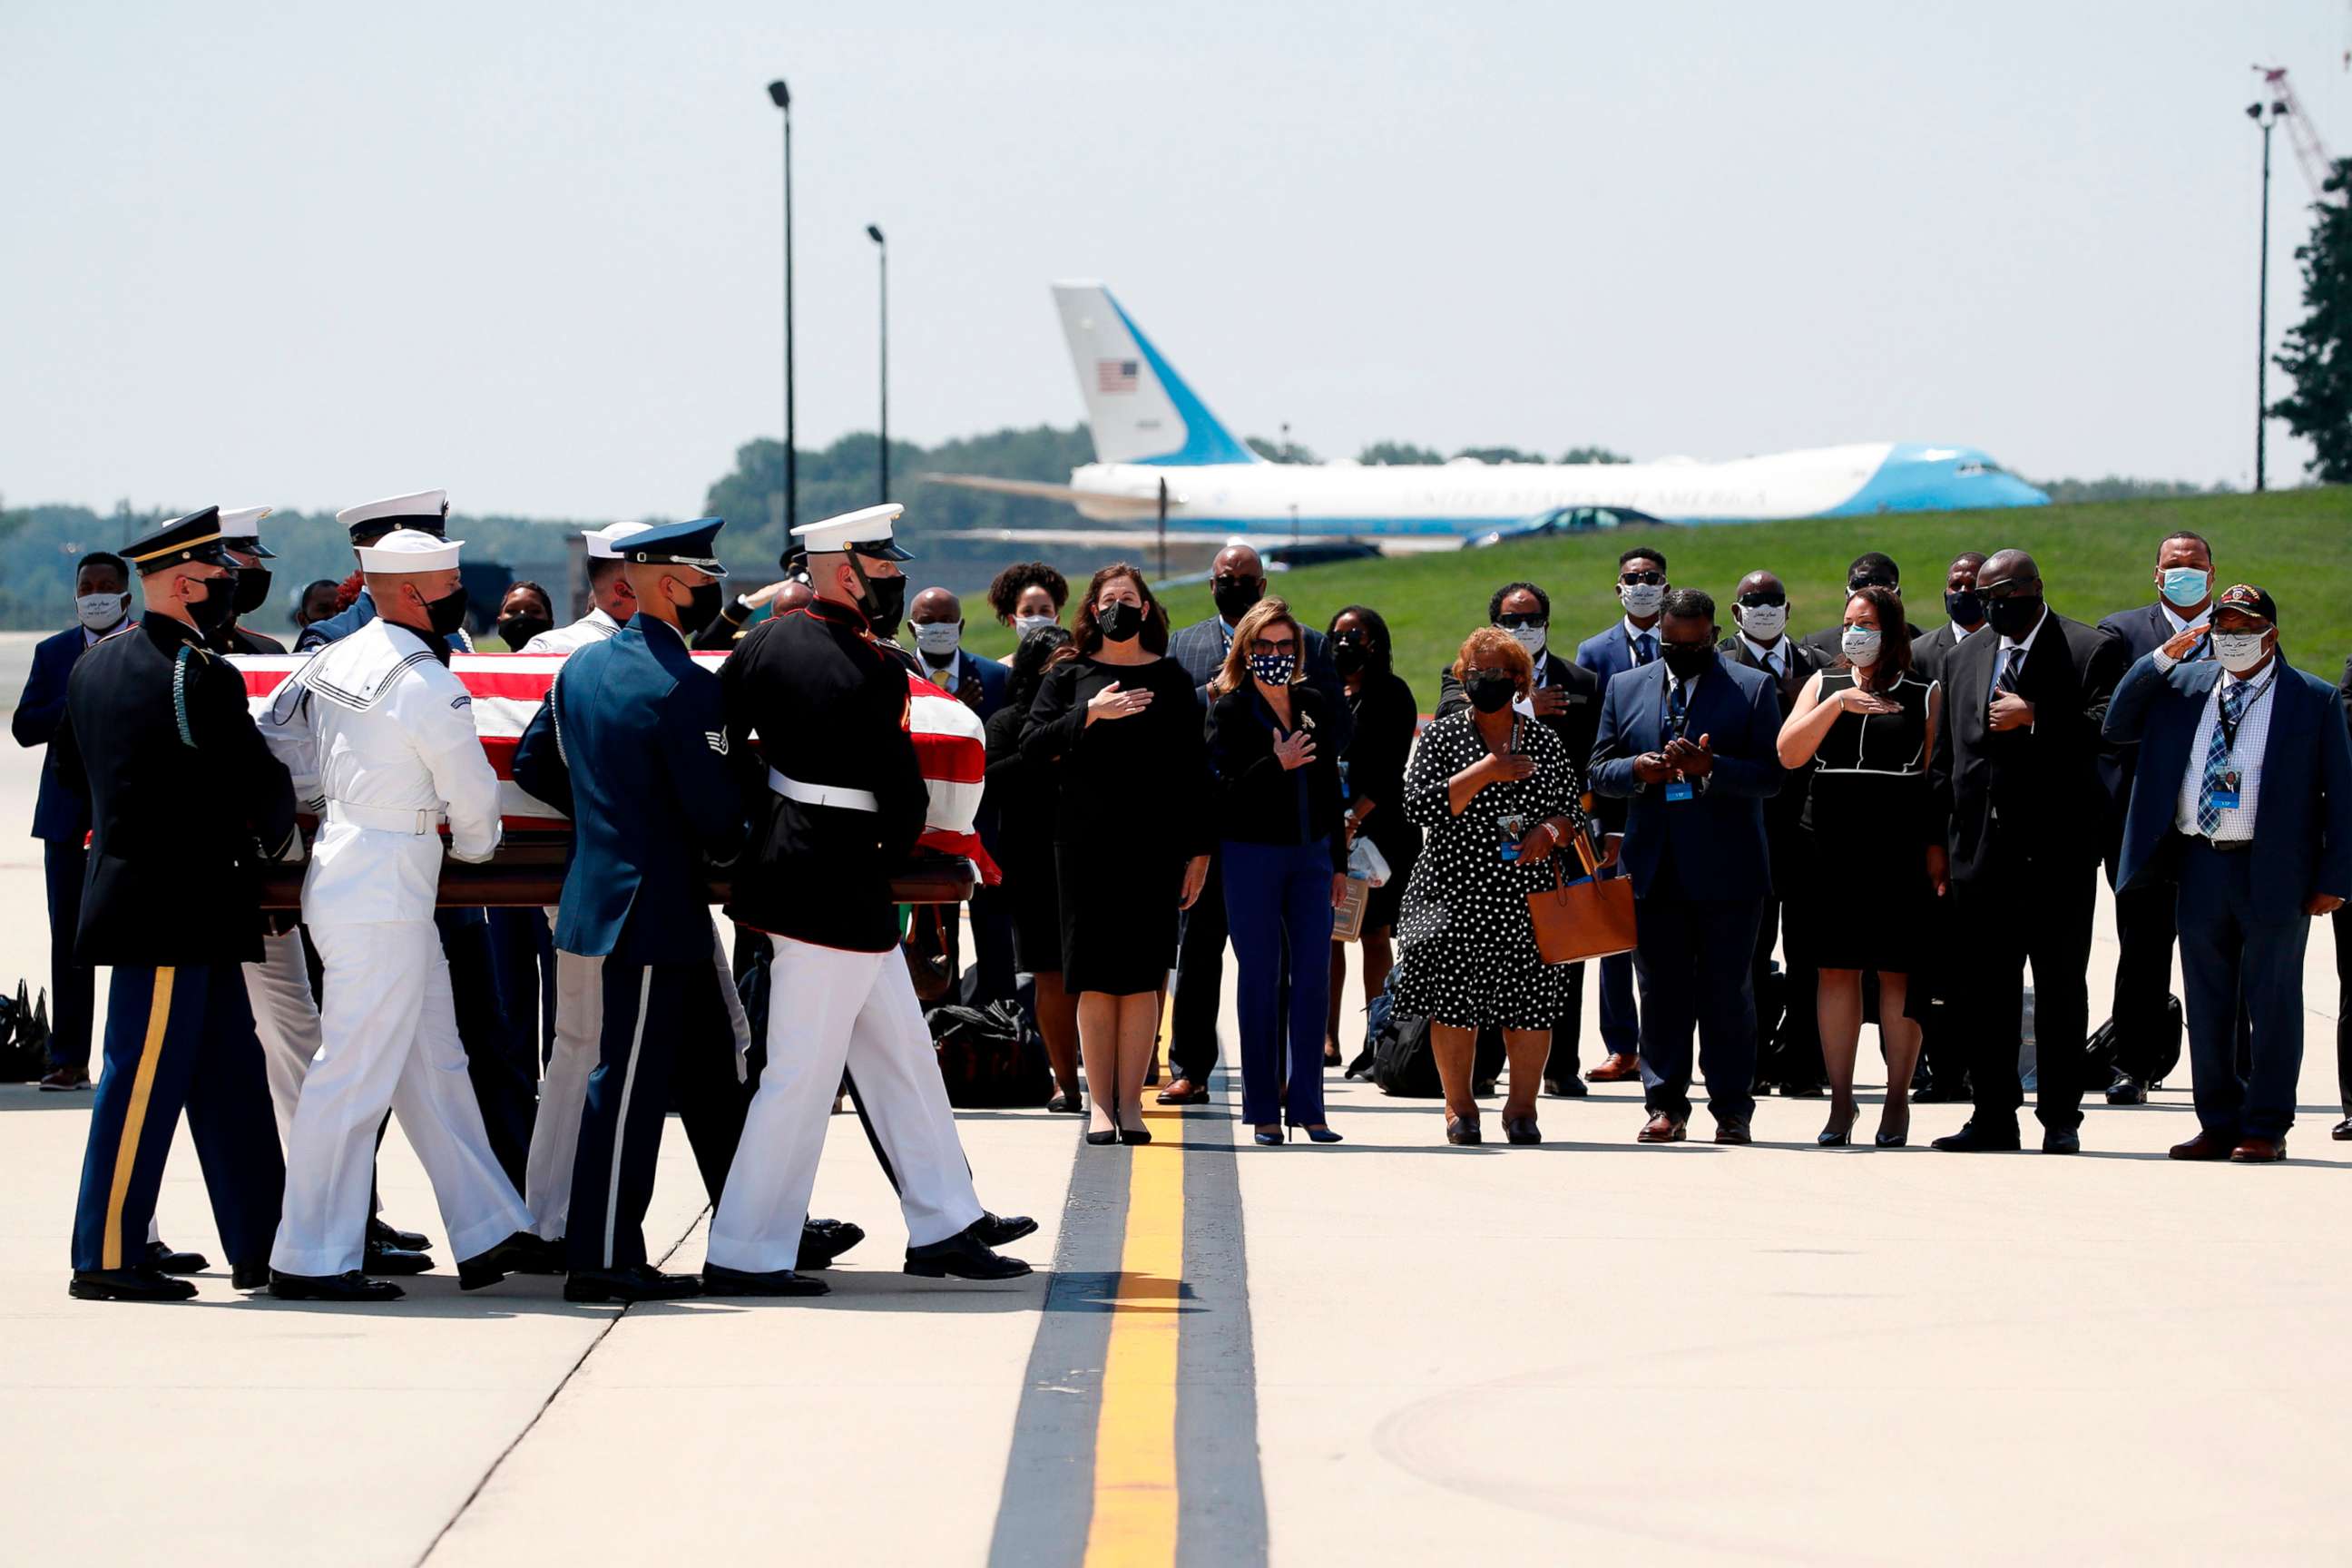 PHOTO: The flag-draped casket of Rep. John Lewis is carried by a joint services military honor guard to the hearse, on July 27, 2020, at Andrews Air Force Base, Md. 